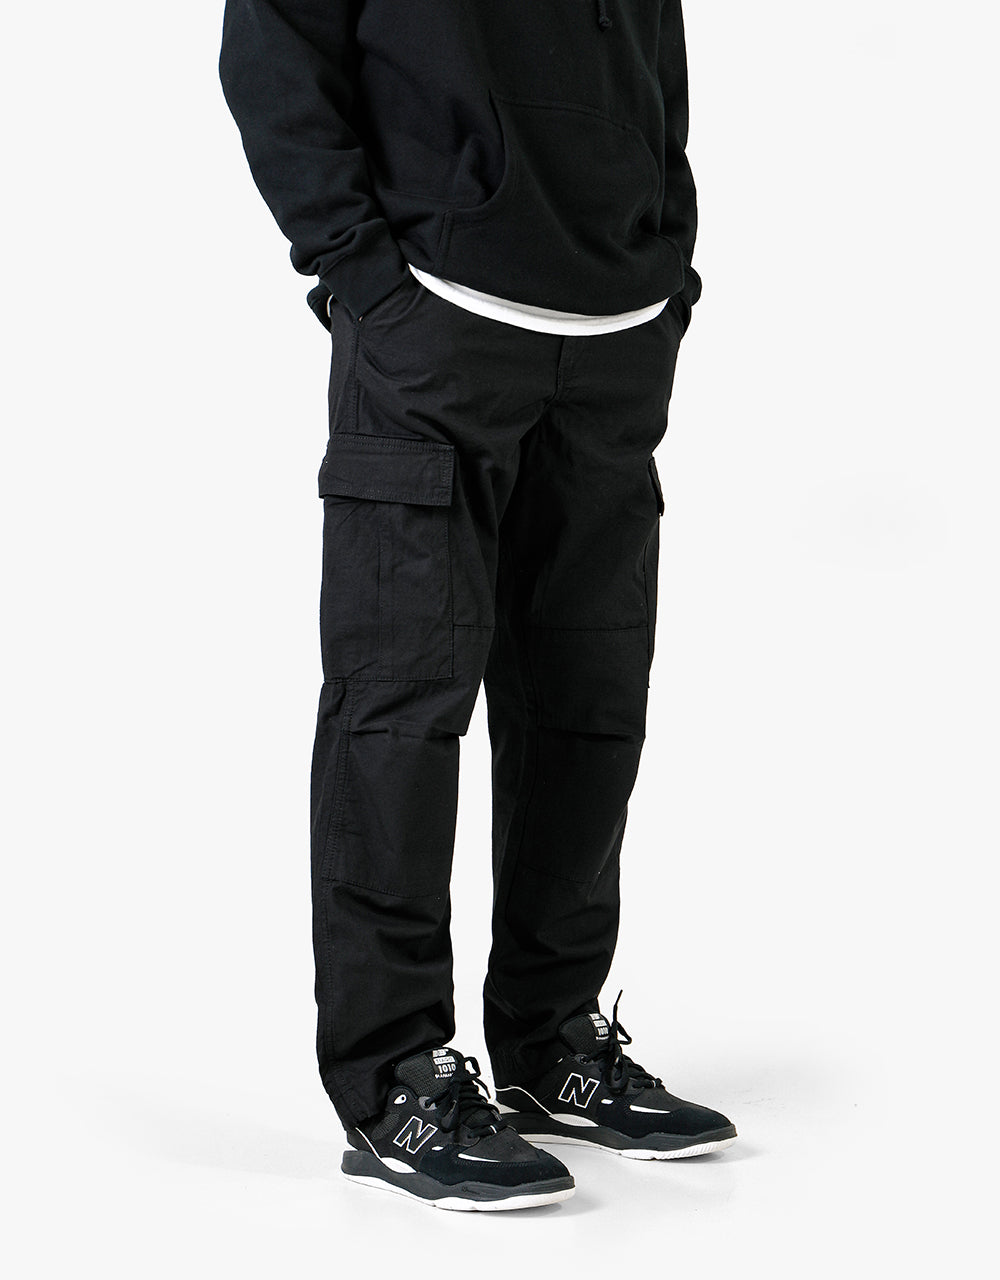 Route One Cargo Pants - Black